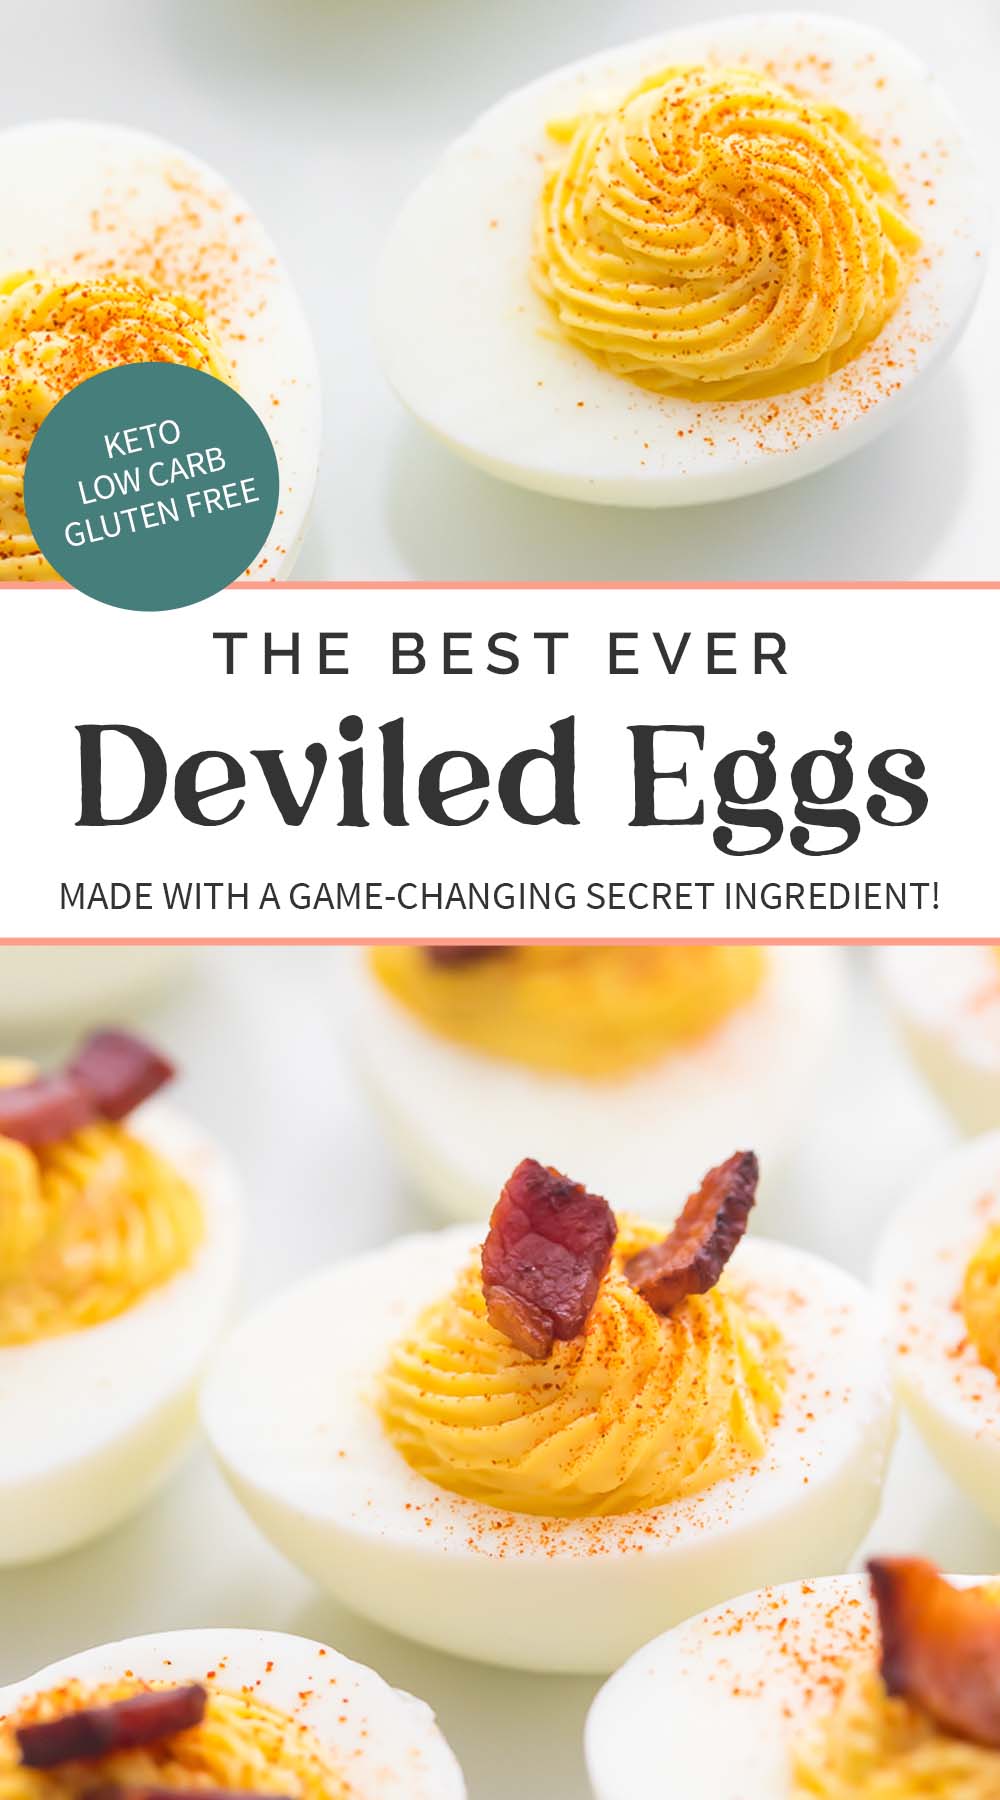 Pin graphic for keto deviled eggs with bacon.